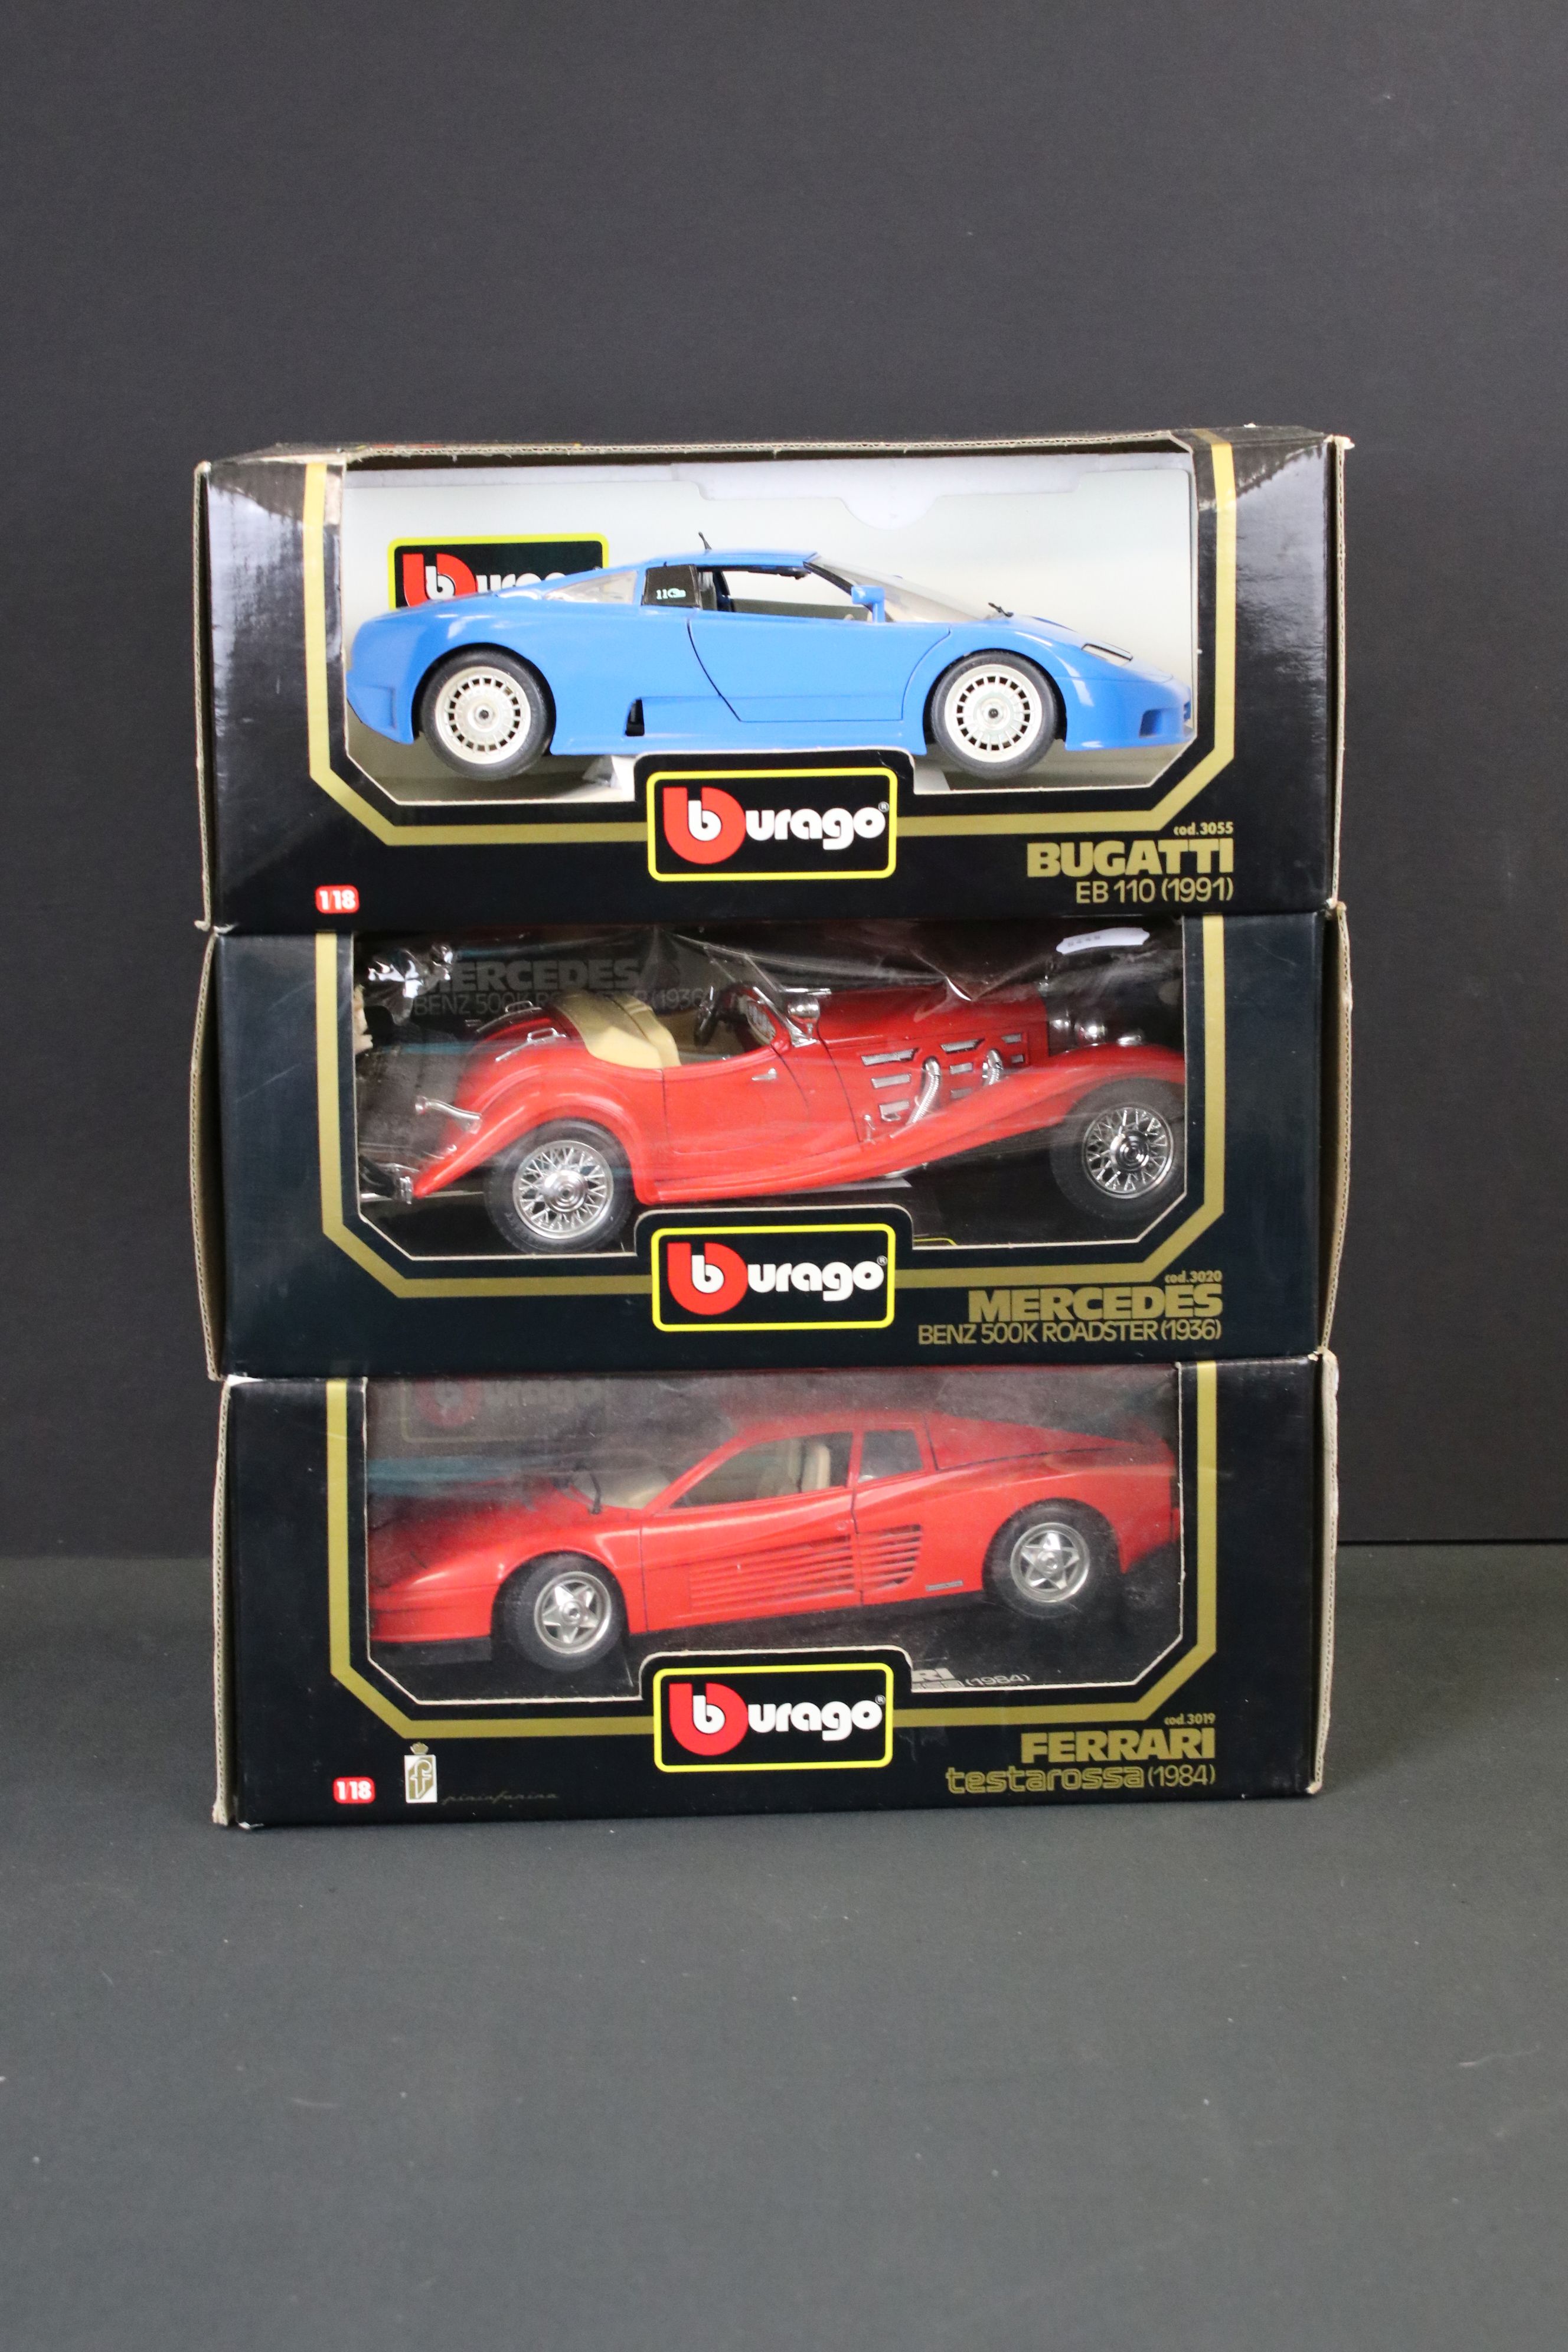 12 Boxed Burago 1/18-1/20 scale diecast models, featuring gold Collection and Diamonds range - Image 3 of 9